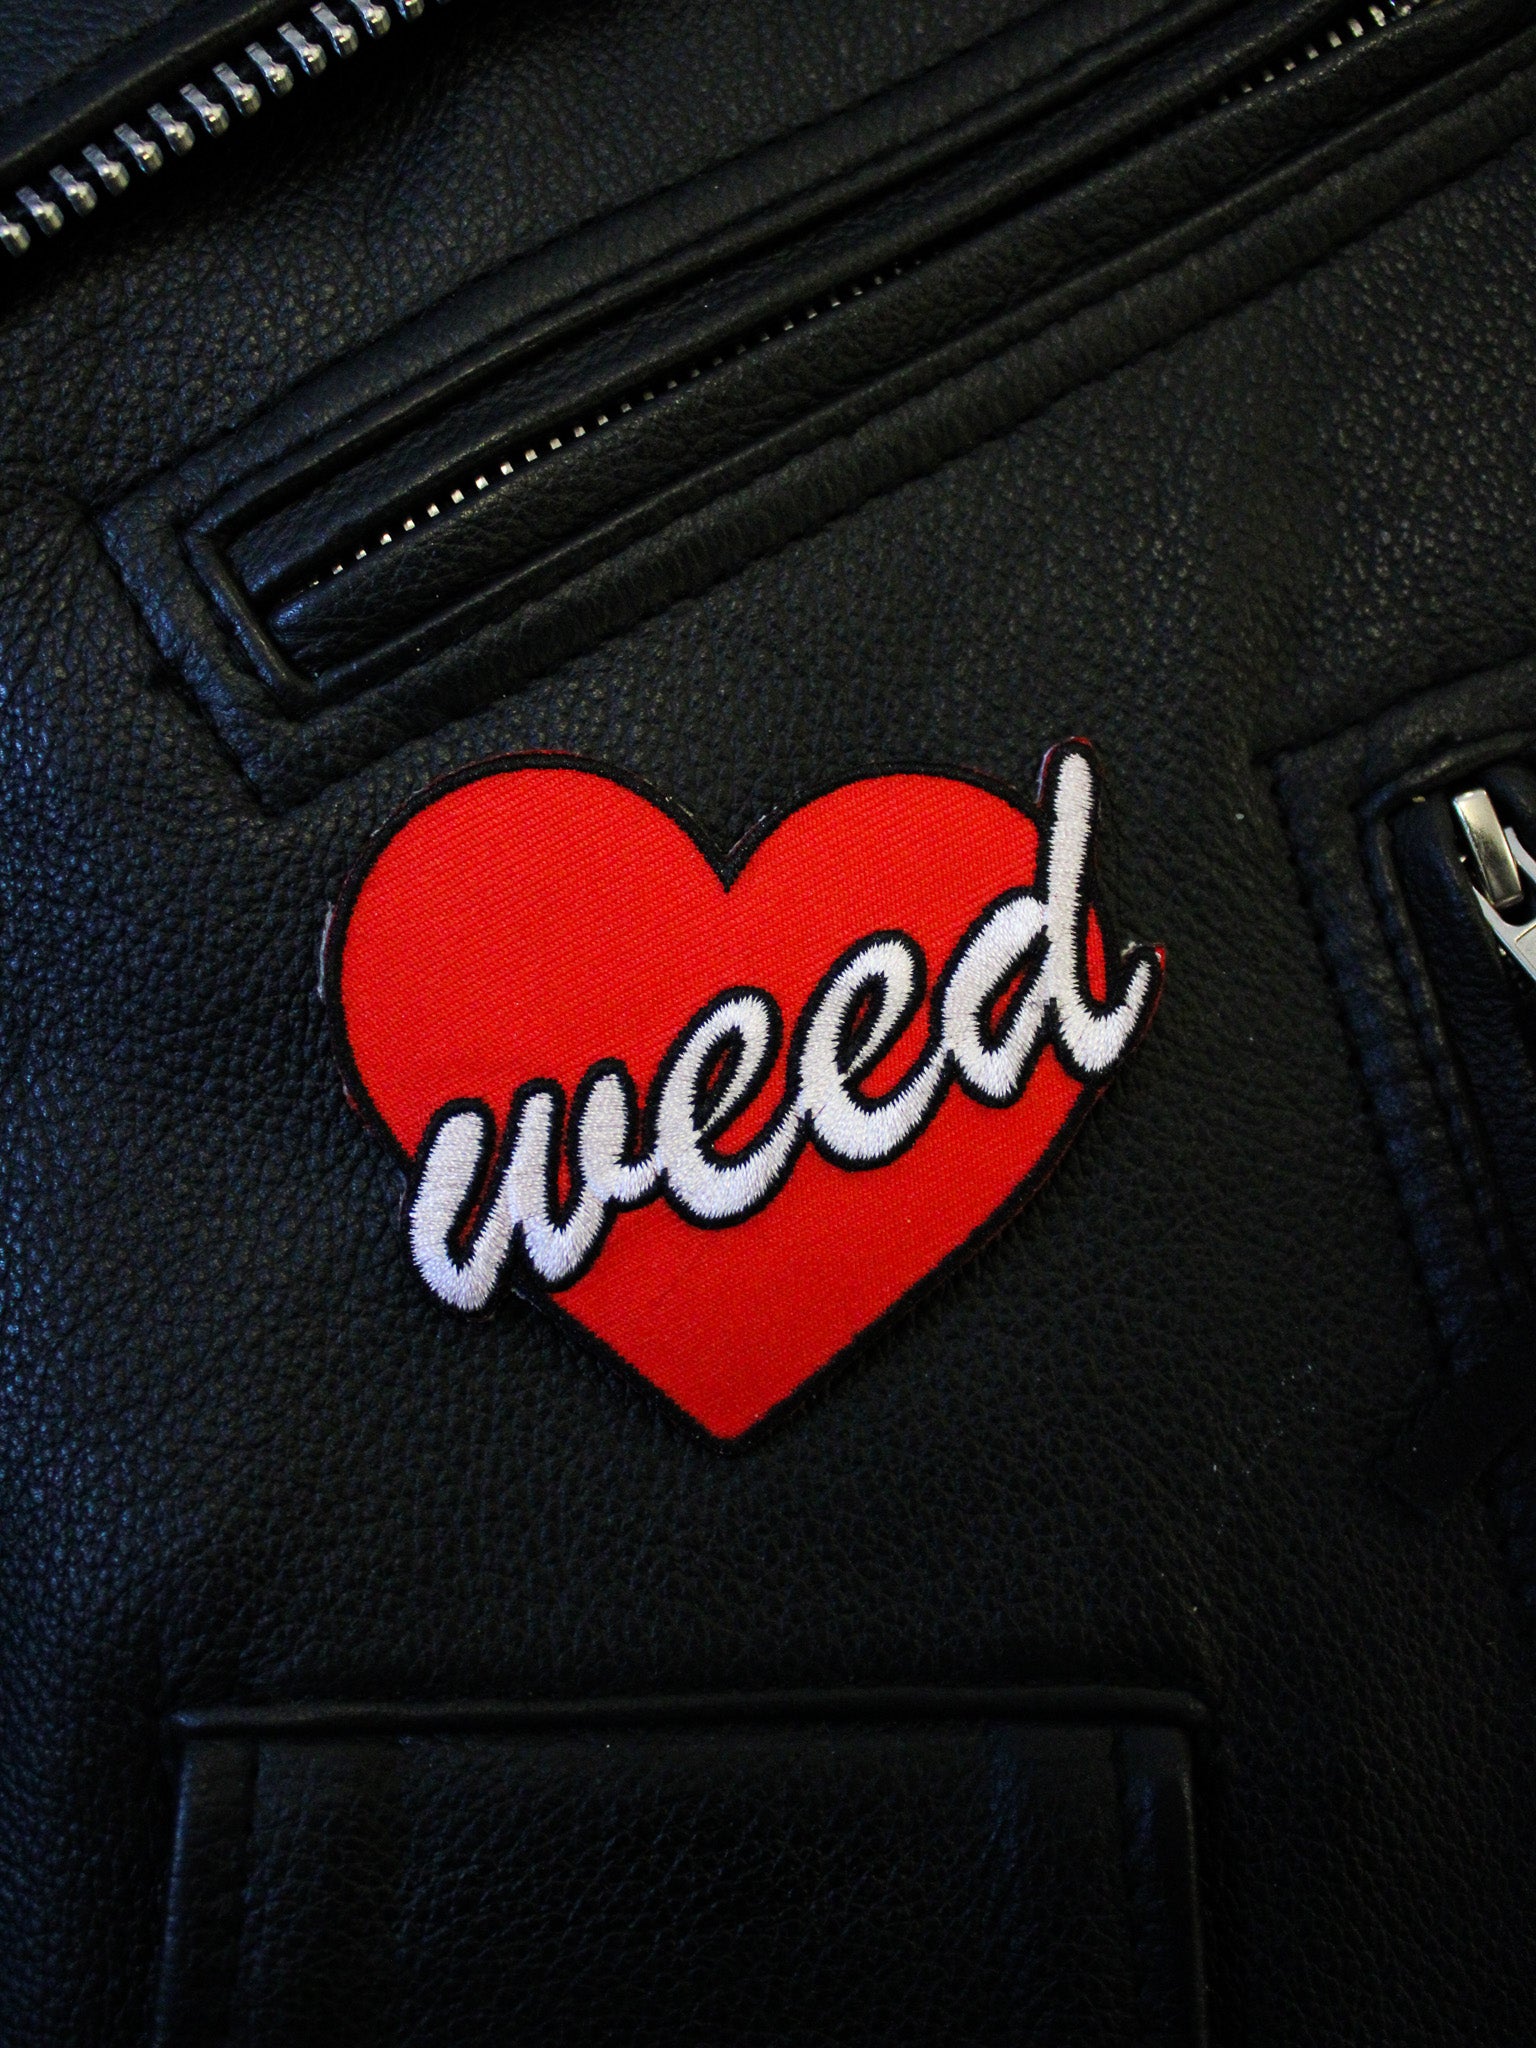 Weed Embroidered Patch